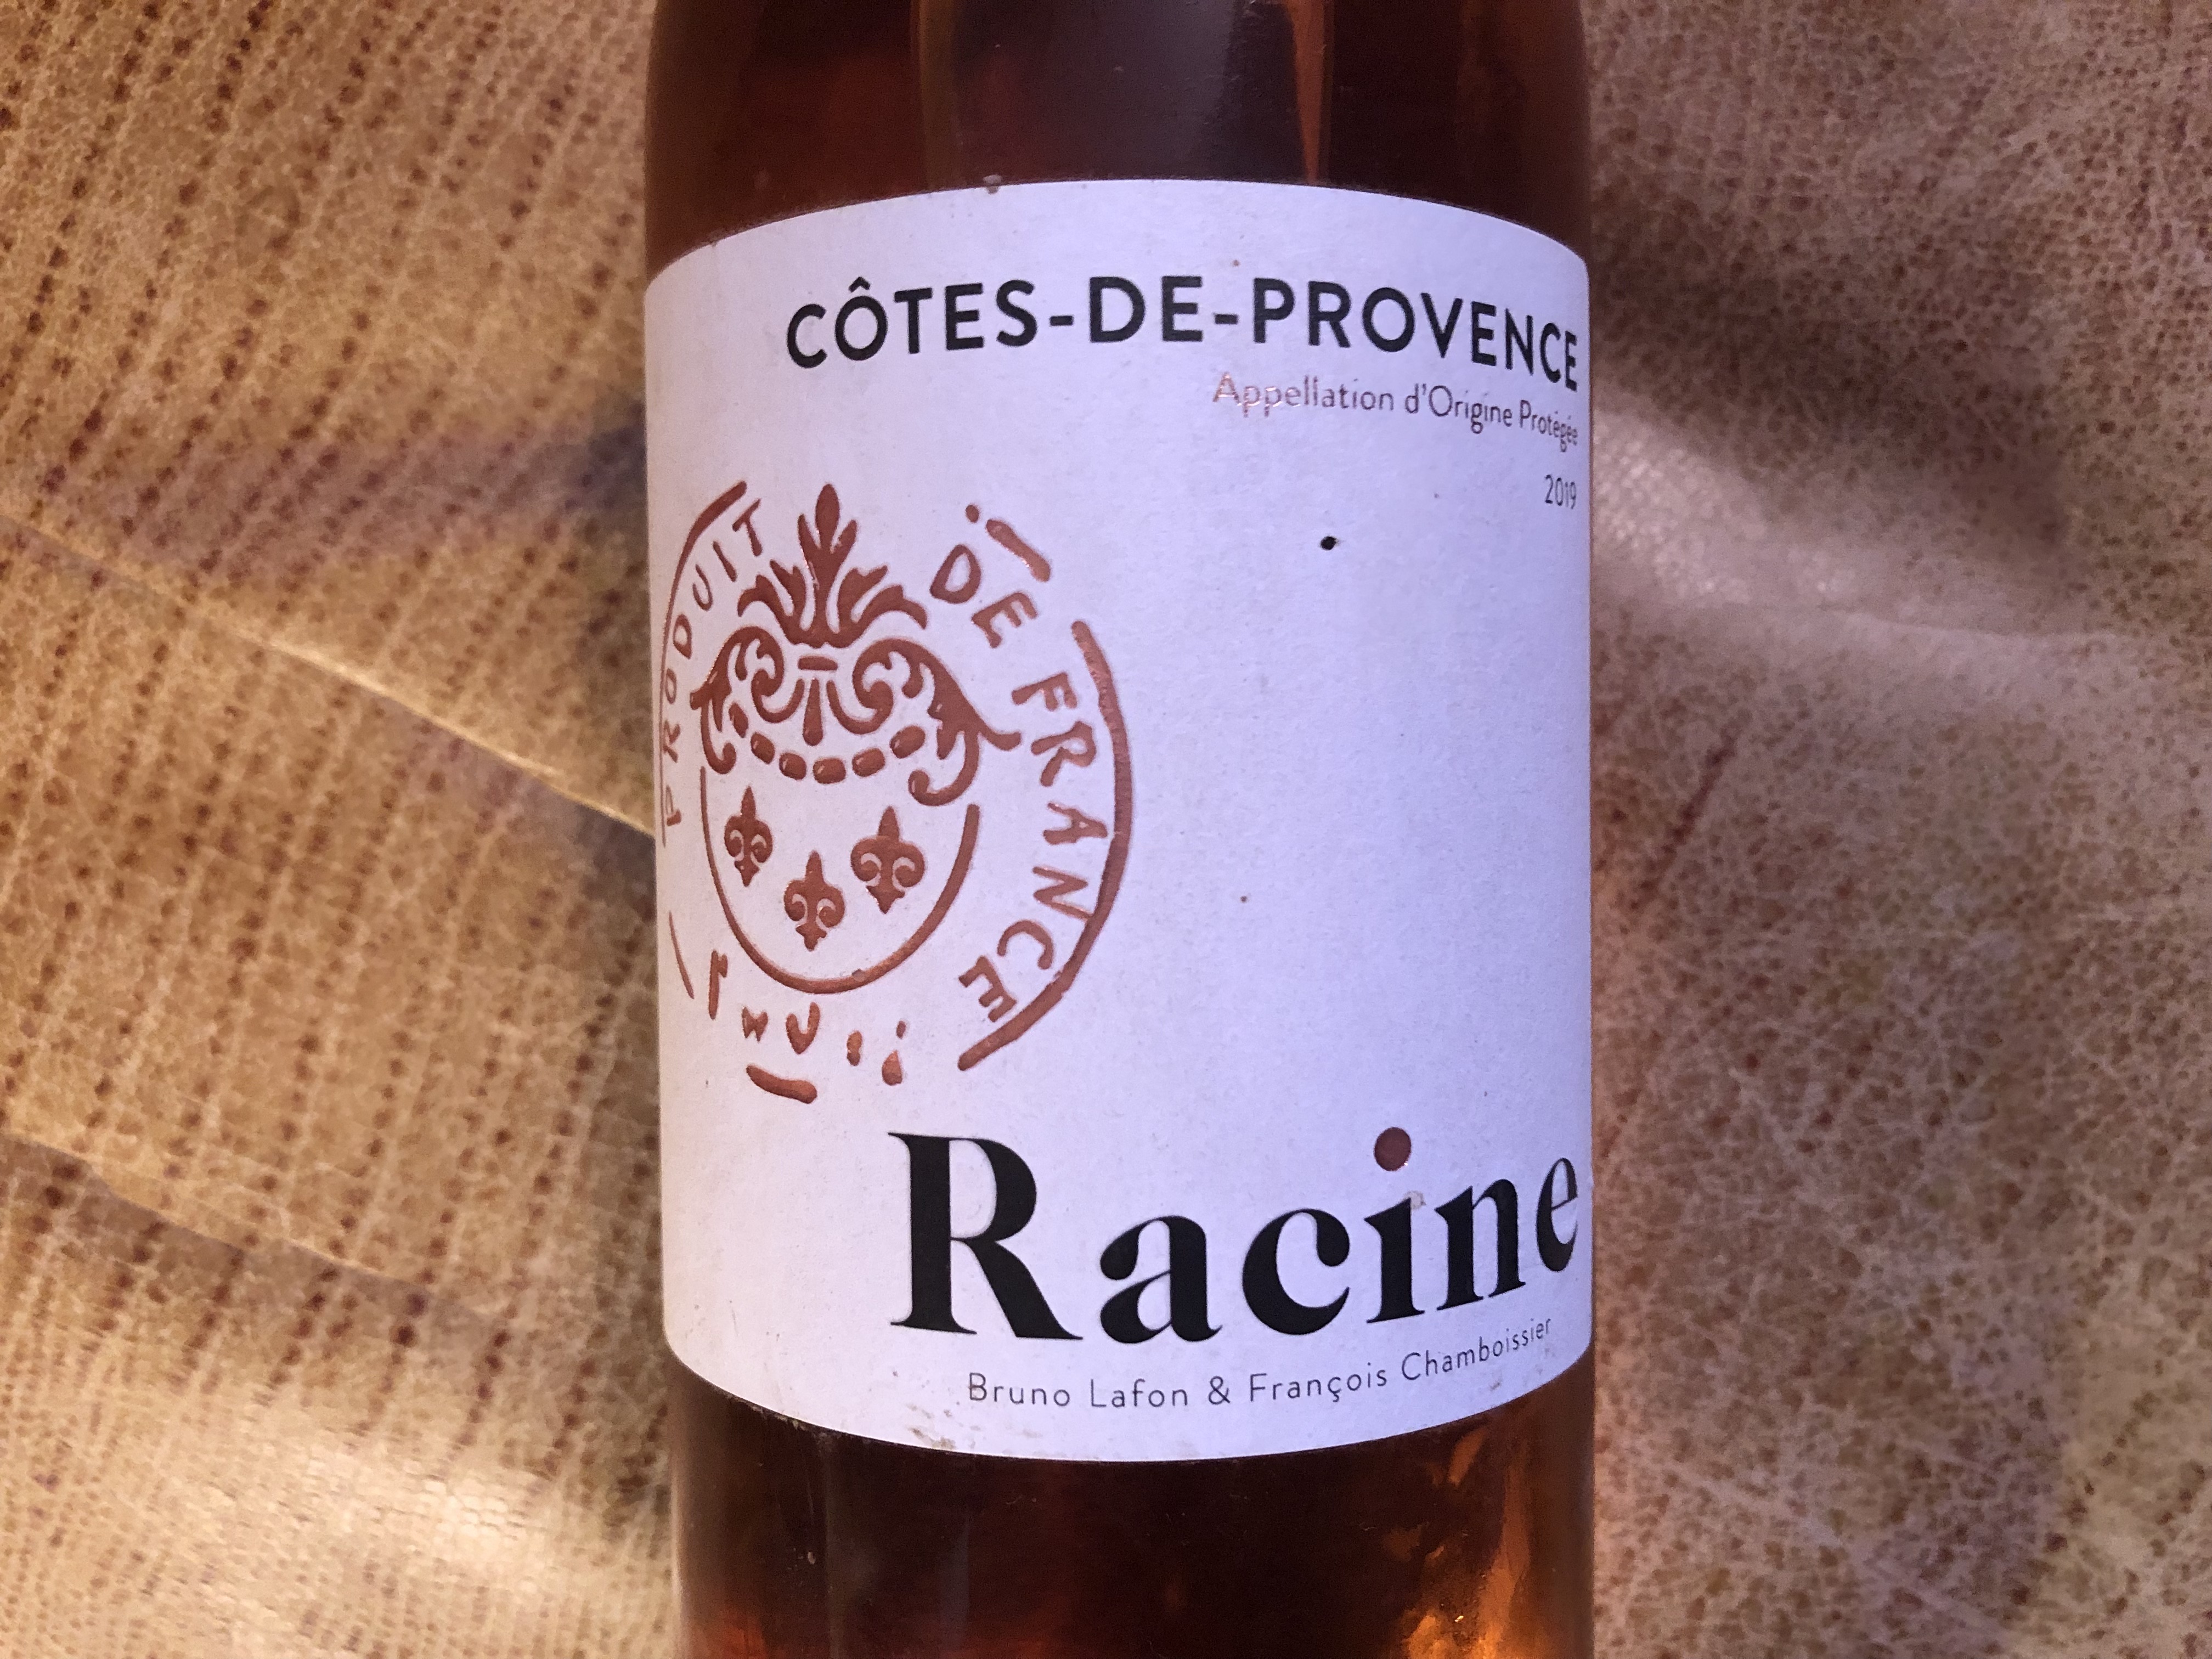 Figuière: Provence is the 'Champagne region' for rosé & reaction